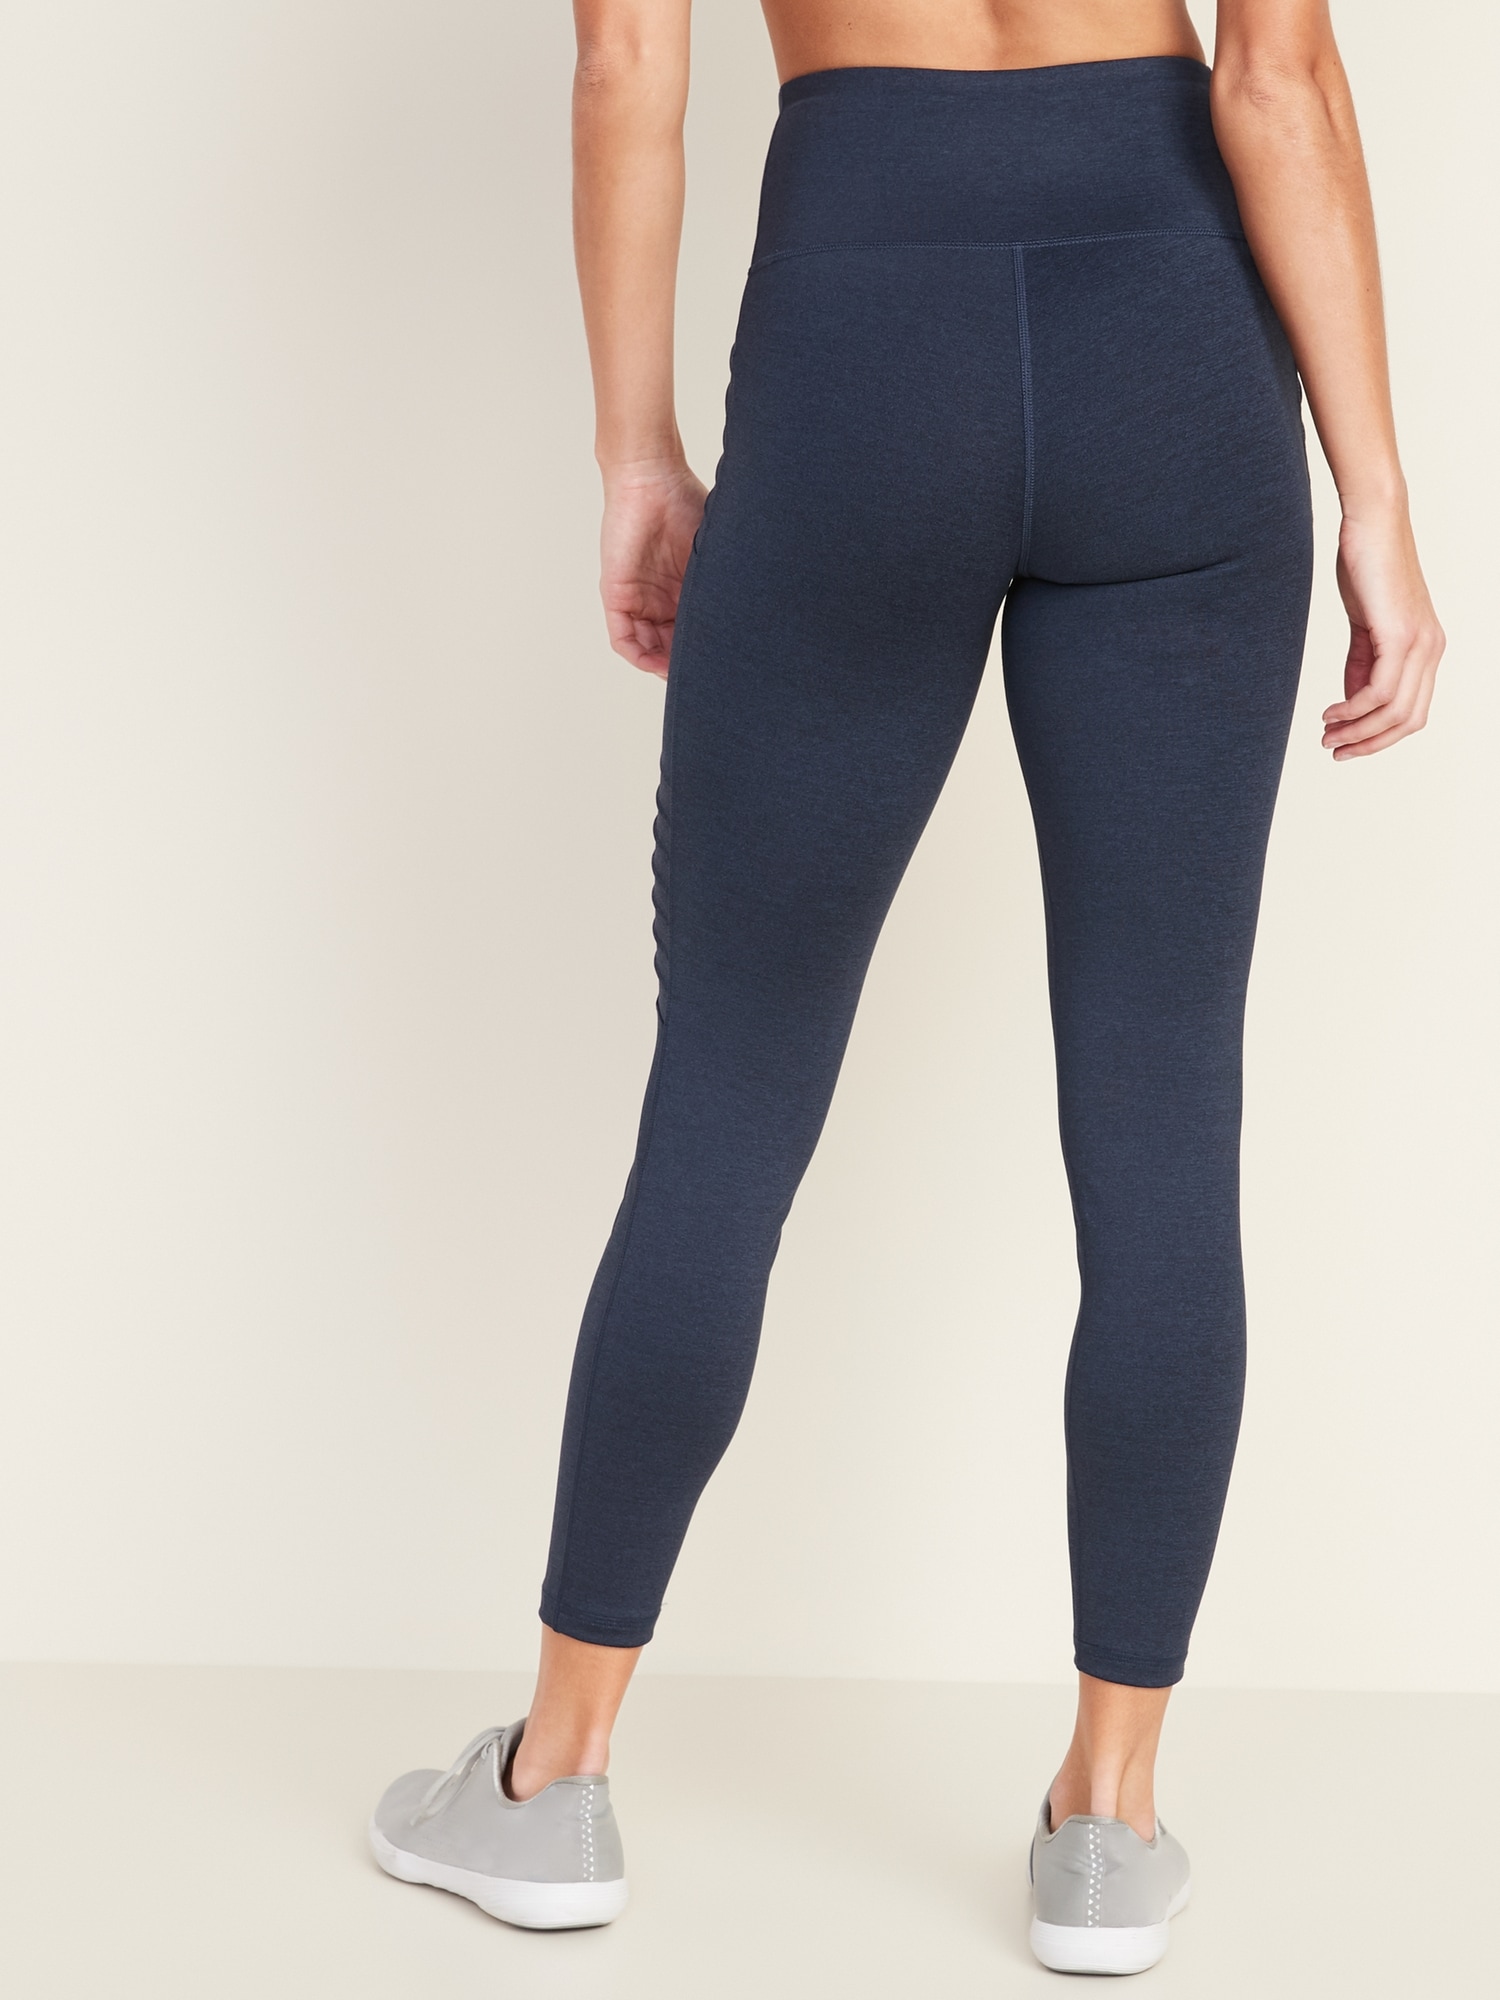 Navy blue, moto leggings with no front or back pockets. 68% cotton, 27%  polyester, and 5% spandex. Sold in packs of six - one small, two mediums,  two larges, one extra large.